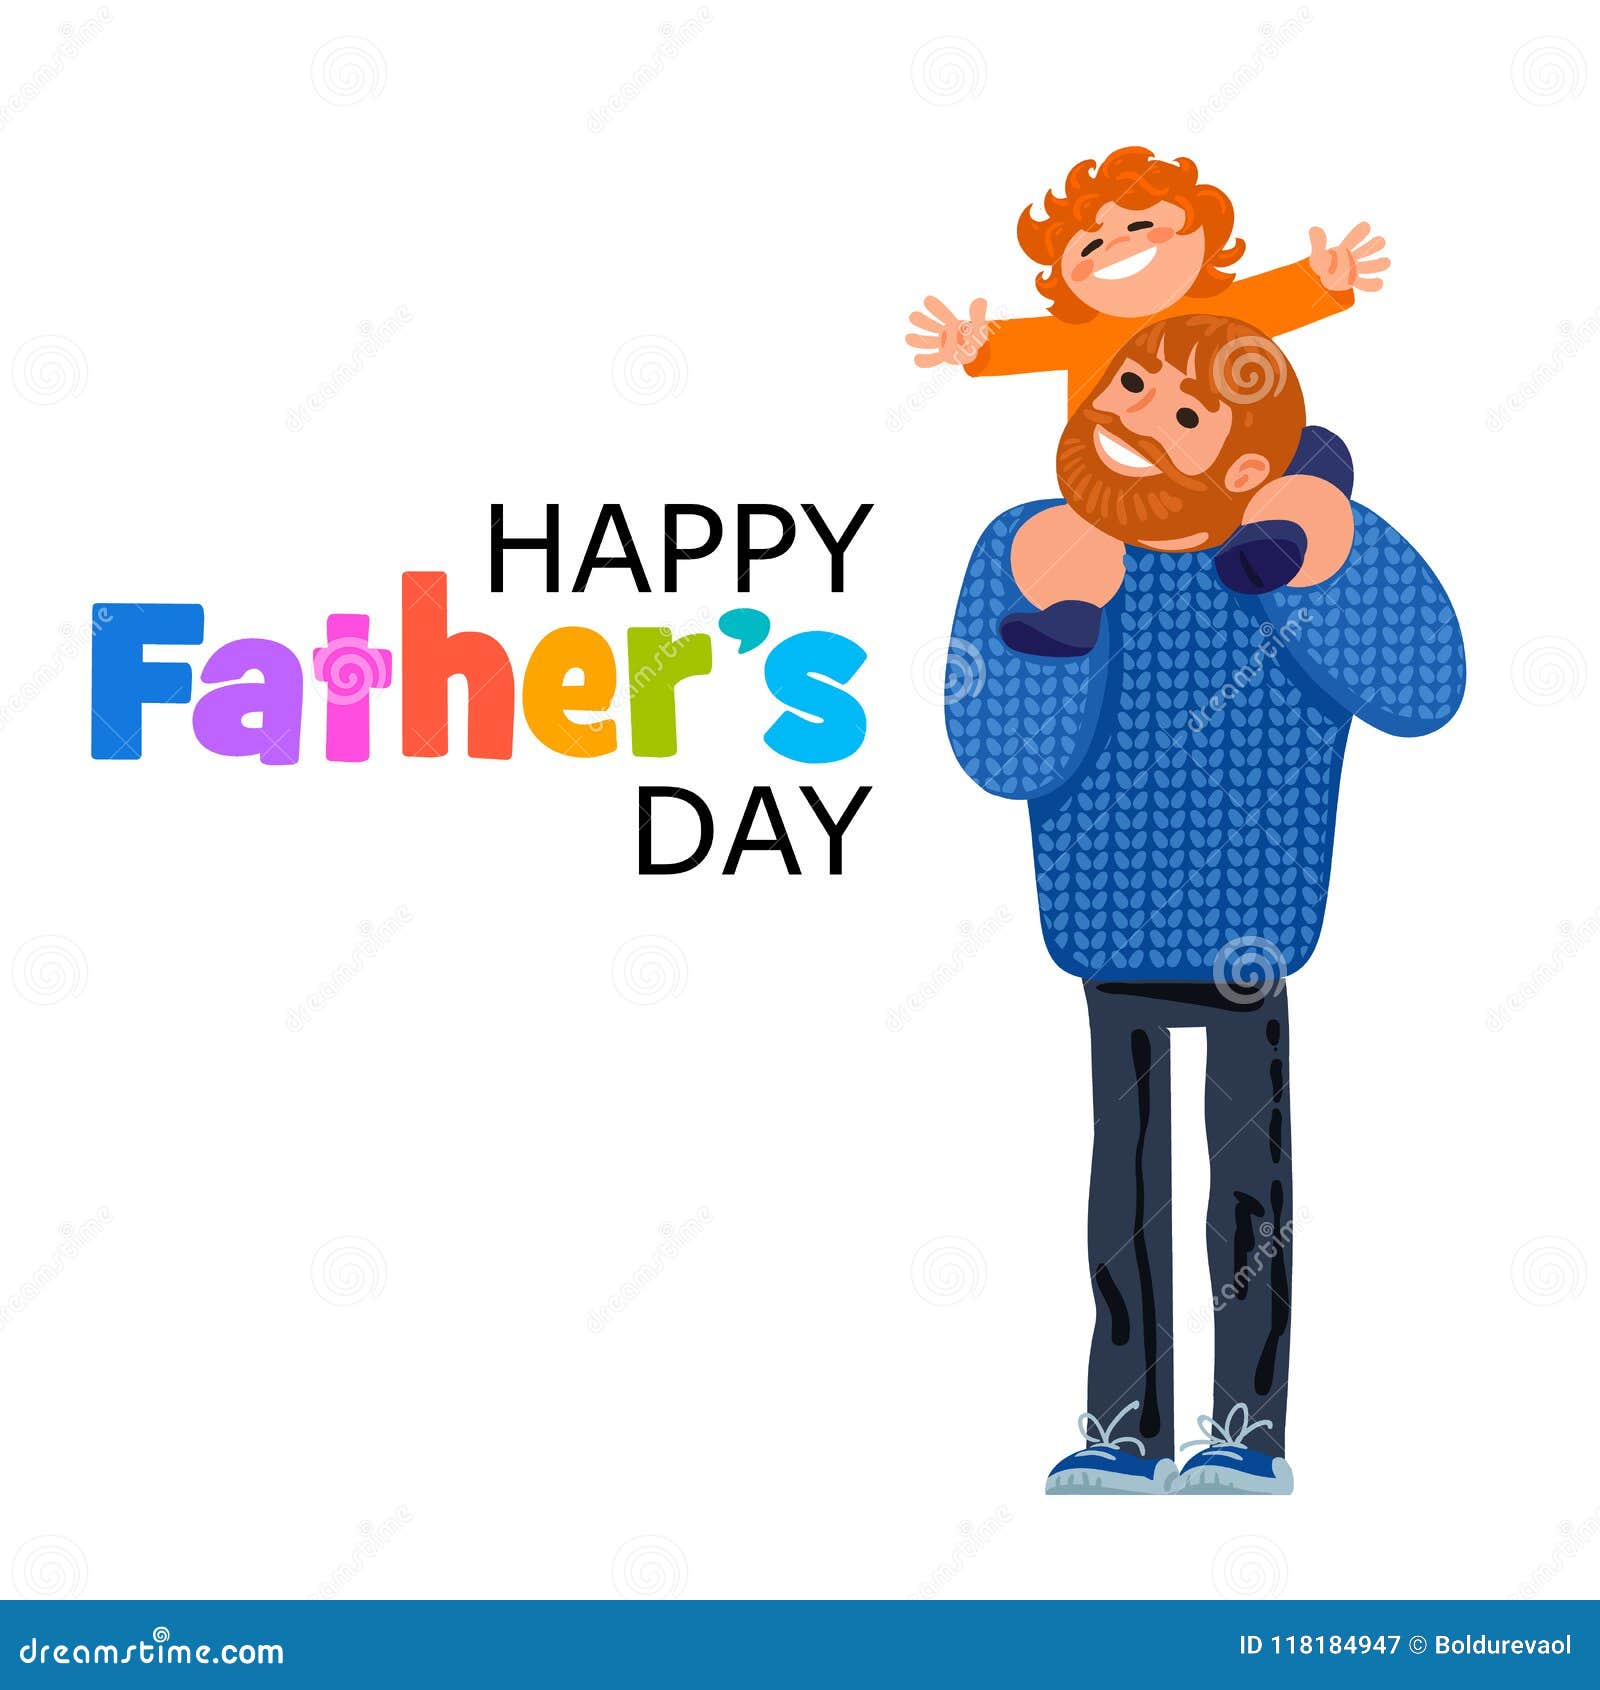 sibling father Gift for father  dad  Fathers Day  Felix dia del padre- for dad brother grandpa son